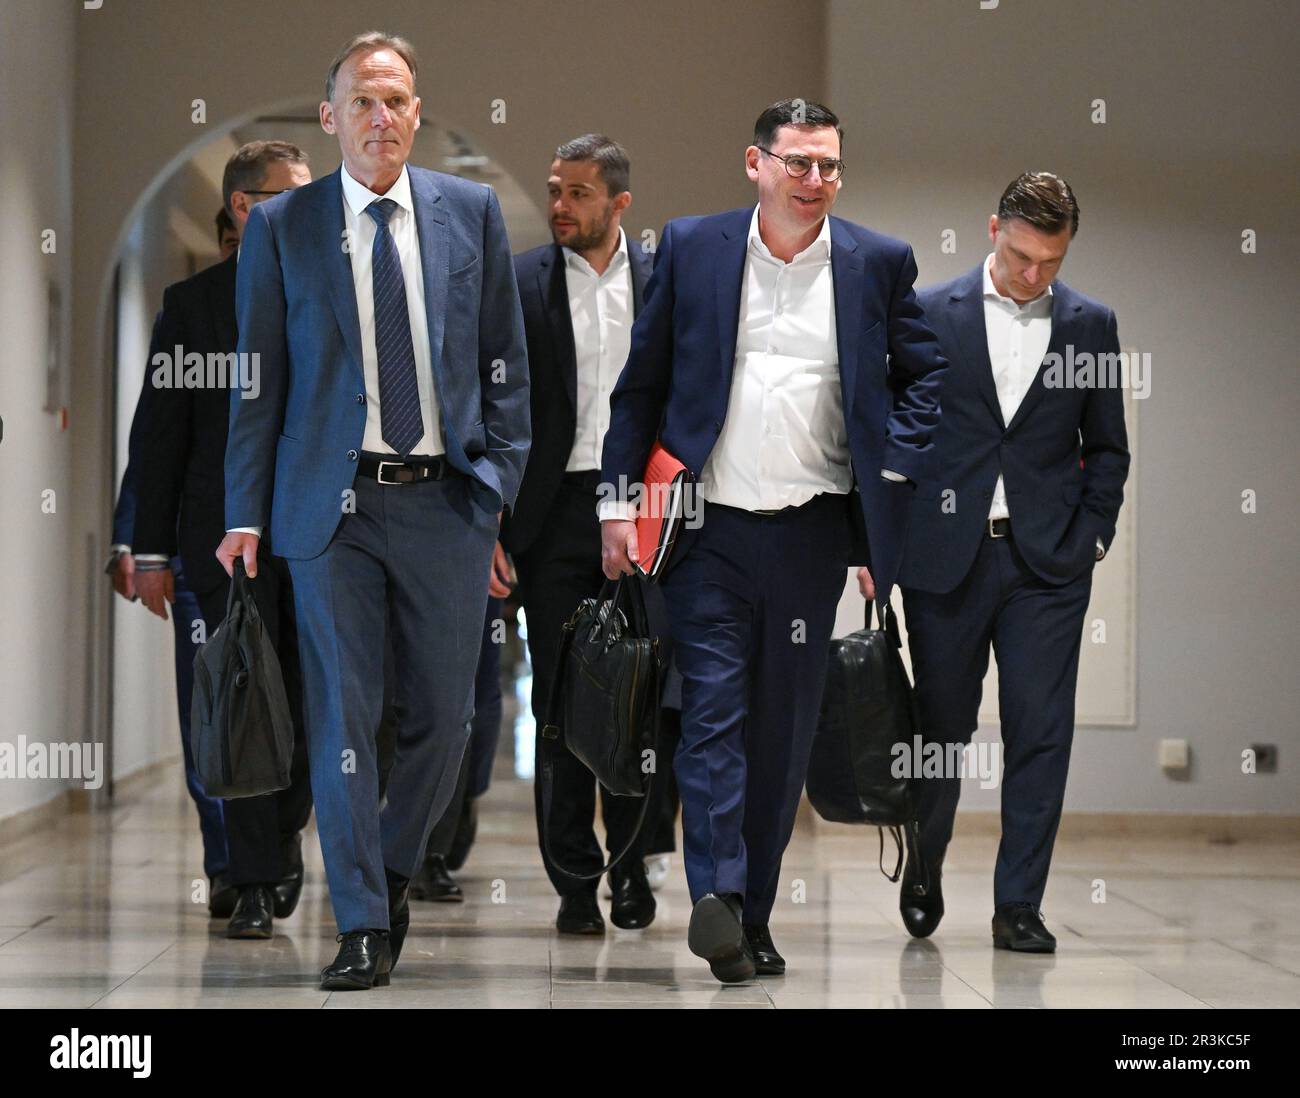 24 May 2023, Hesse, Frankfurt/Main: Hans-Joachim Watzke (l), Managing Director of Borussia Dortmund and Chairman of the DFL Supervisory Board, and Oliver Leki (2nd from right), CFO of SC Freiburg and one of the two Managing Directors of DFL GmbH, are on their way to the DFL General Meeting at Frankfurt Airport. The topic is the possible entry of an investor into the German Soccer League (DFL). Photo: Arne Dedert/dpa - IMPORTANT NOTE: In accordance with the requirements of the DFL Deutsche Fußball Liga and the DFB Deutscher Fußball-Bund, it is prohibited to use or have used photographs taken in Stock Photo